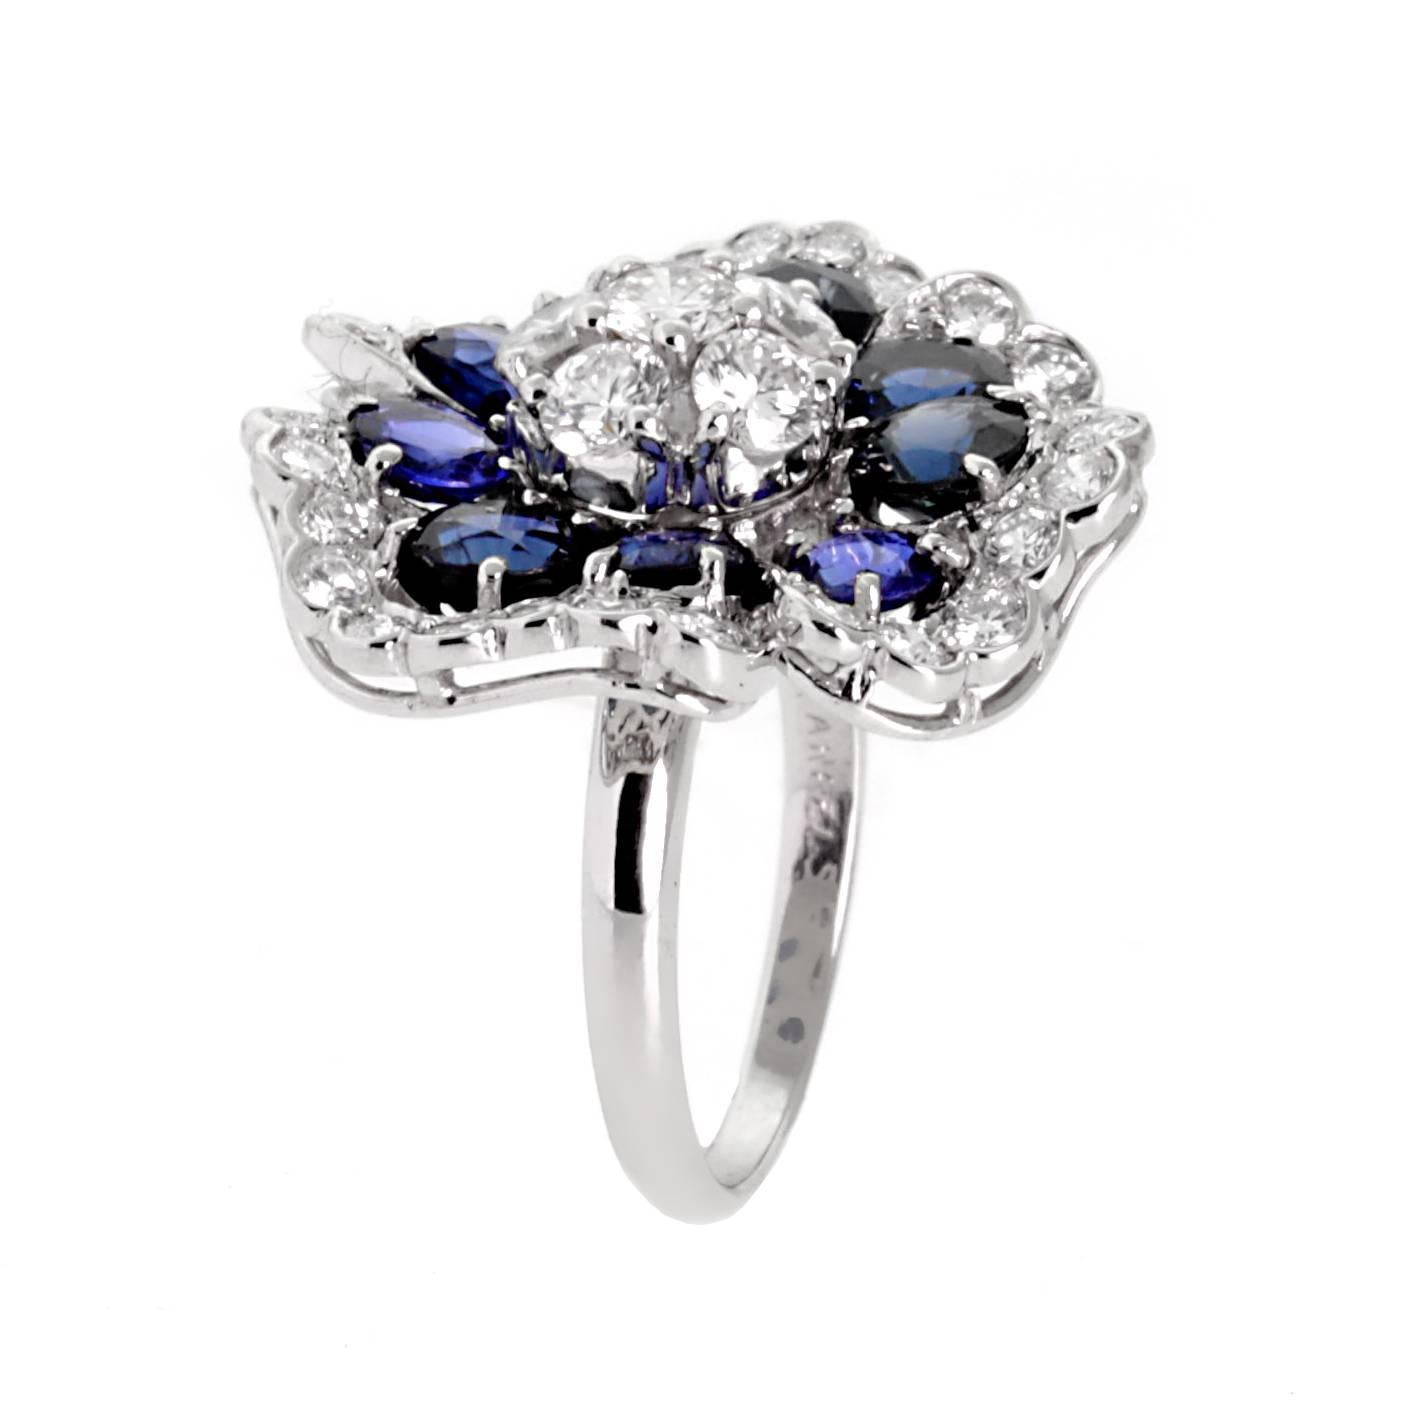 A fabulous Van Cleef & Arpels blue sapphire and diamond ring in the shape of a Camellia flower set in 18k white gold. The flower measures .86" wide.

This magnificent piece is offered by Opulent Jewelers, we are an accredited boutique